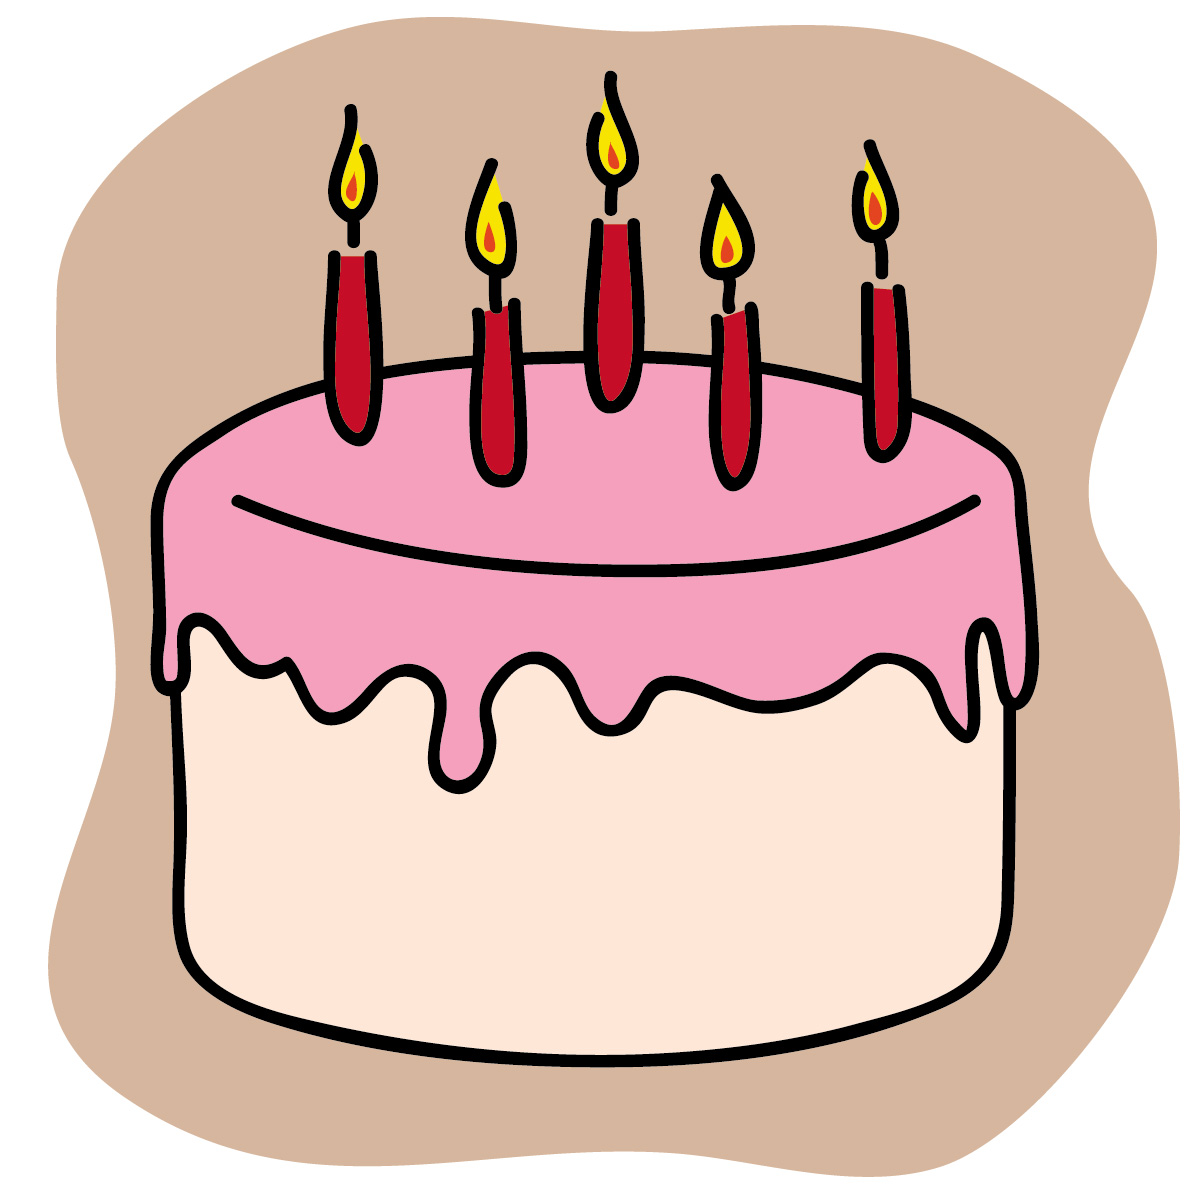 Free Birthday Cake Clip Art - Free Clipart Images